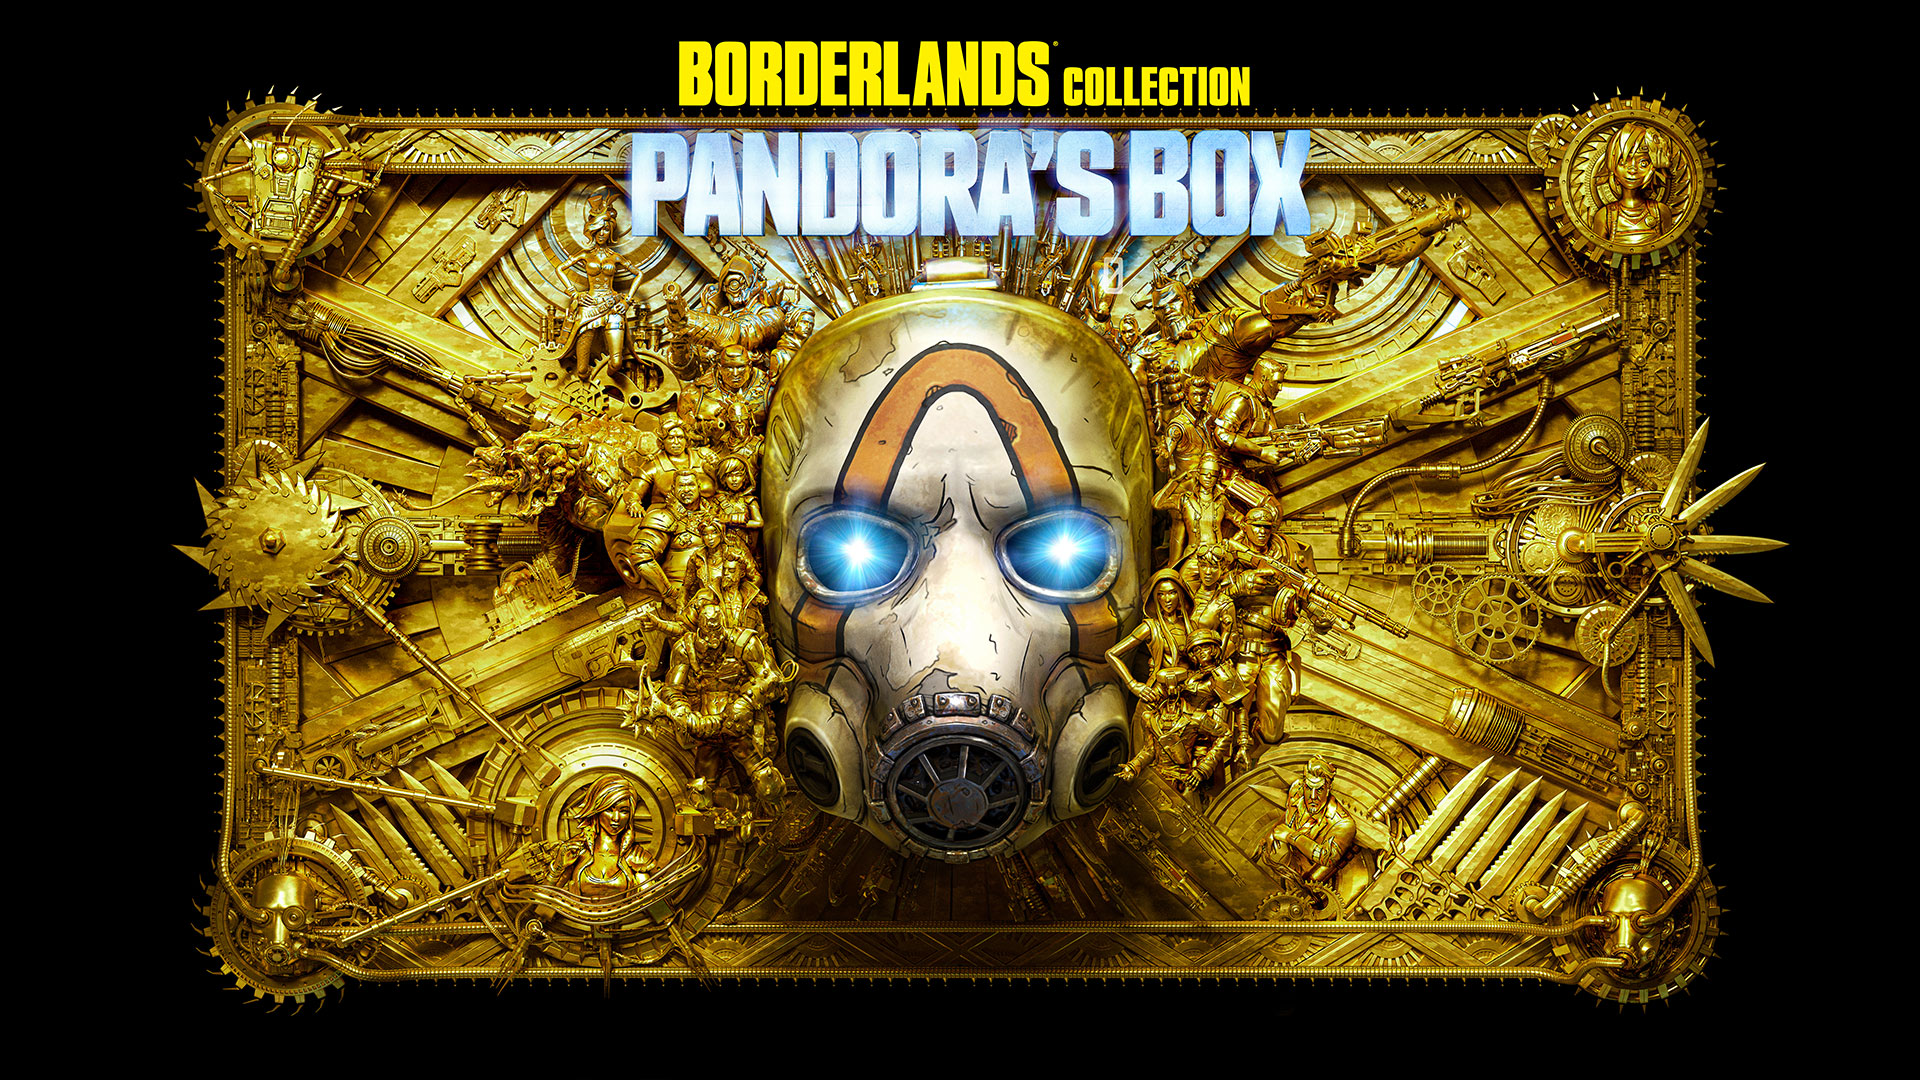 Borderlands Collection: Pandora's Box is launching September 1, 2023